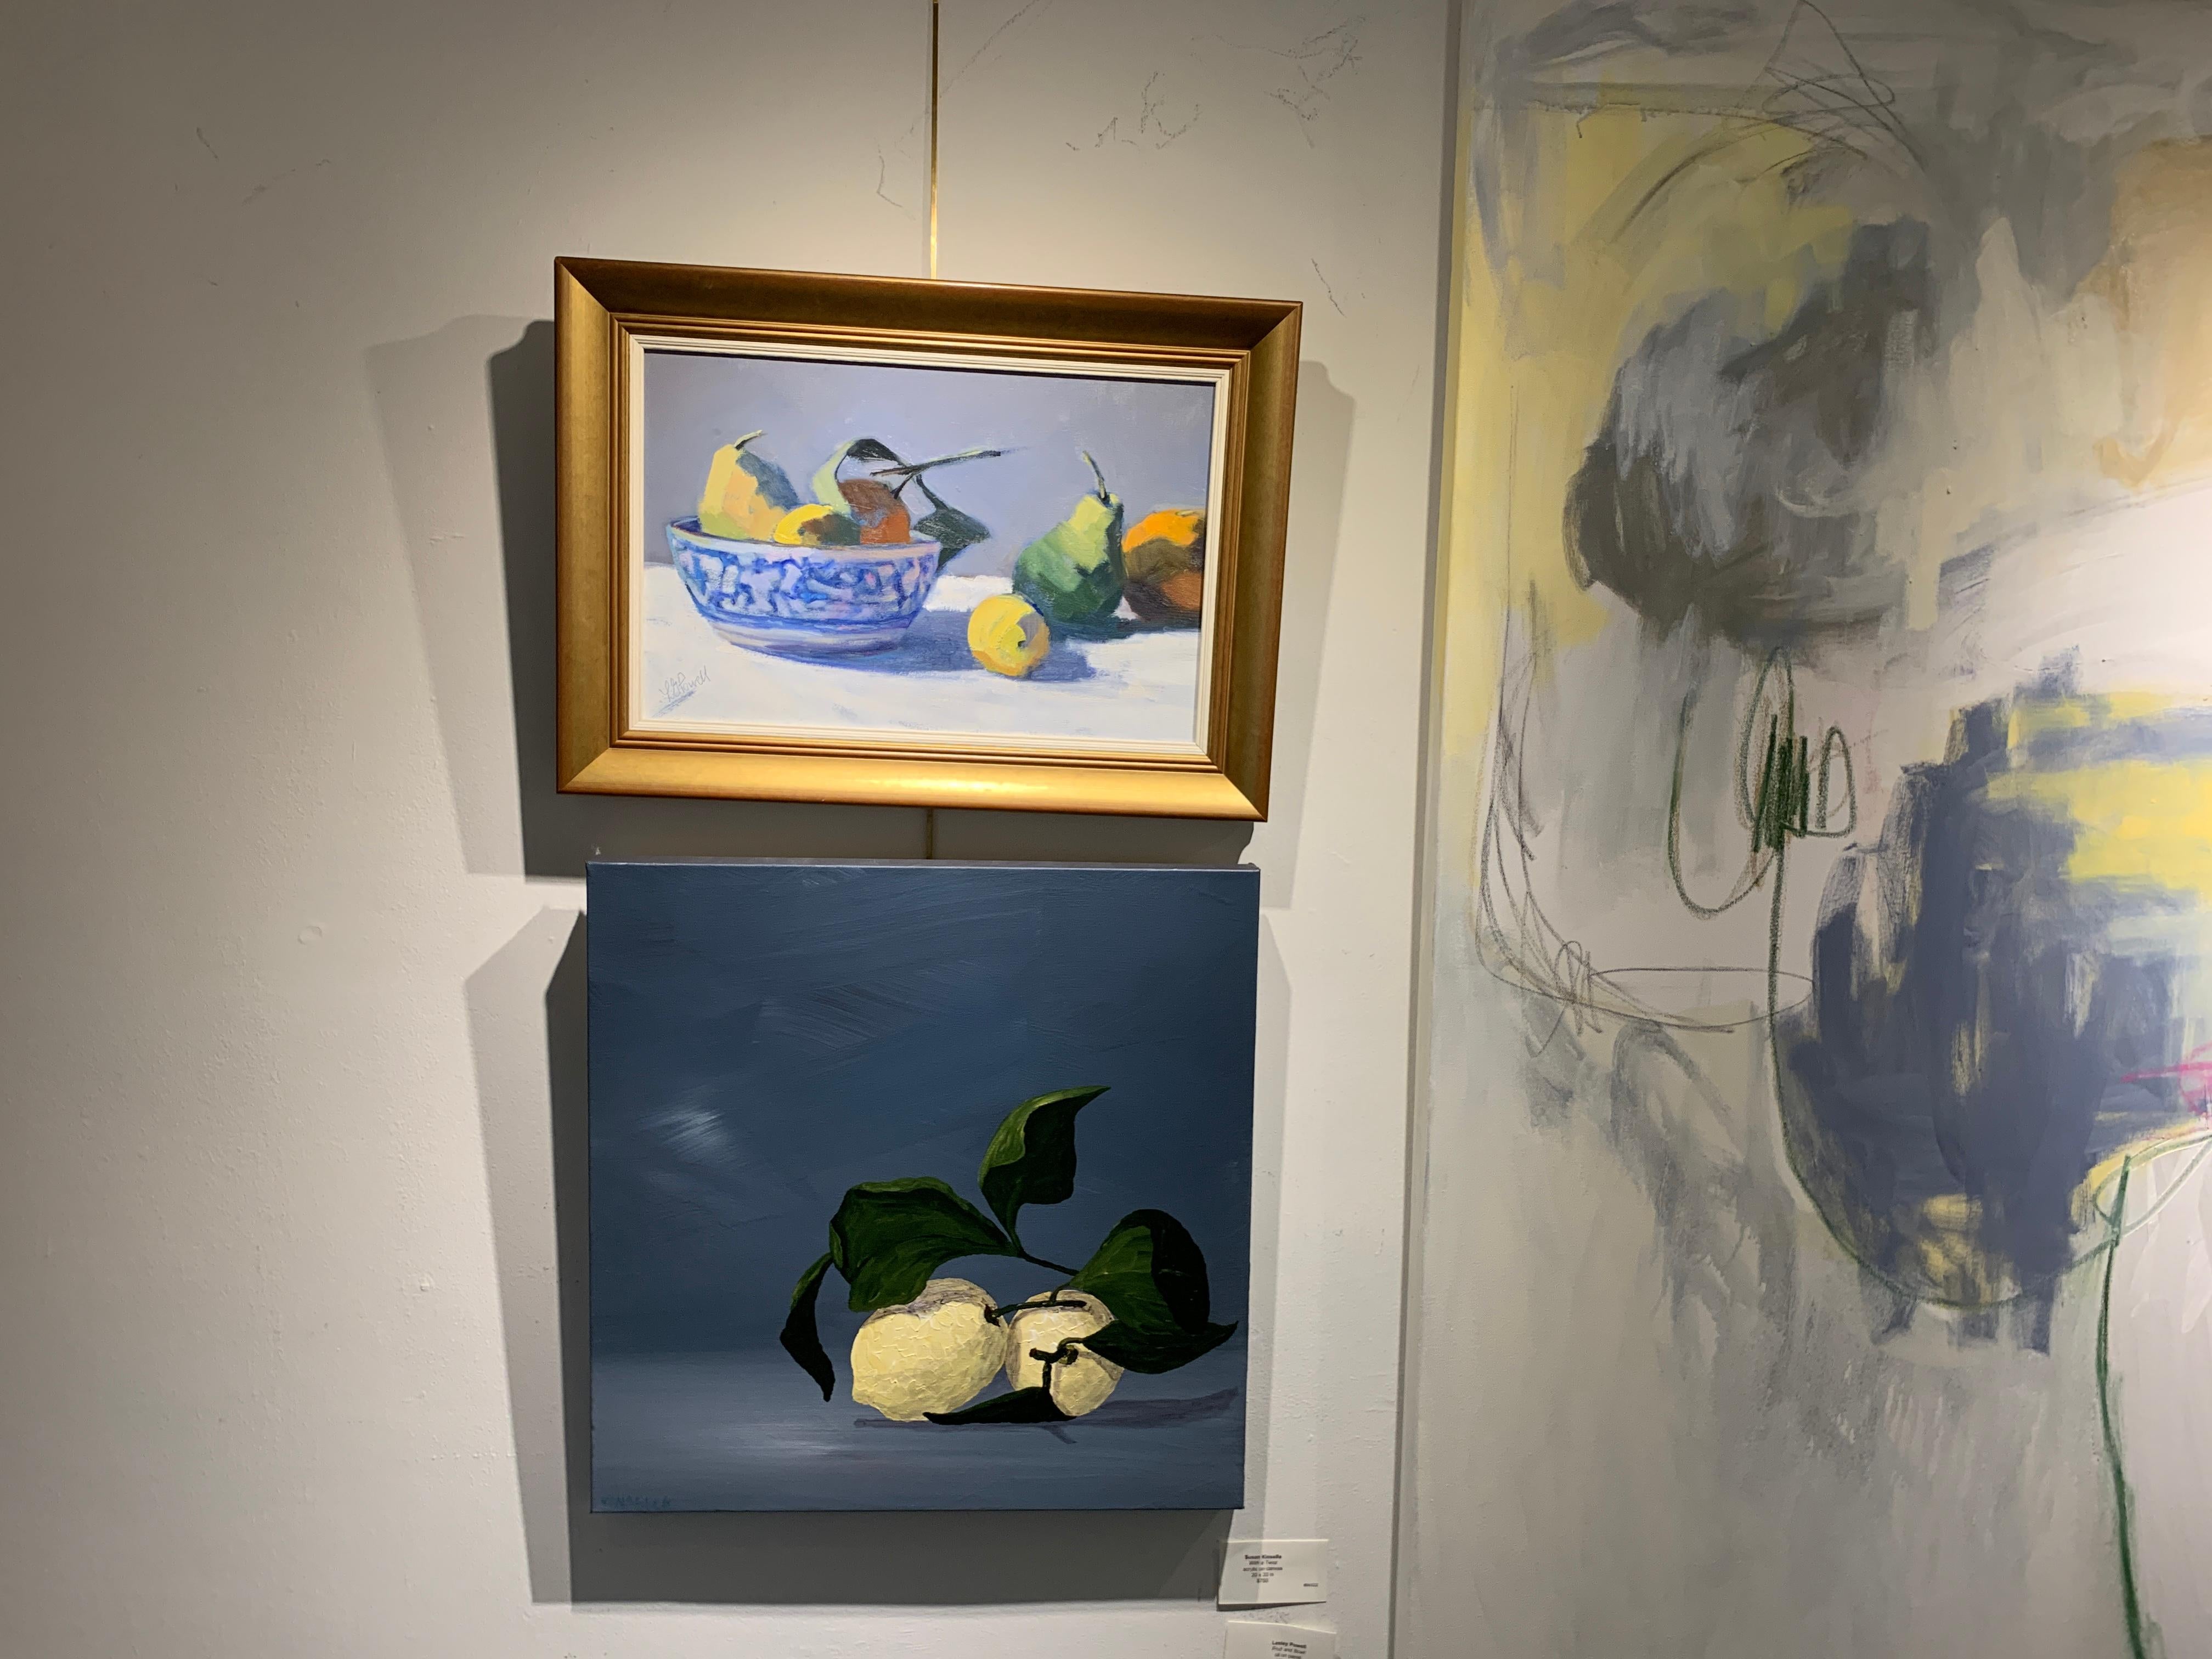 'Fruit and Bowl' is a small framed Post-Impressionist still-life painting of horizontal format, created by American artist Lesley Powell in 2019. Featuring a palette made of yellow, blue, green, orange and white tones, the painting depicts a